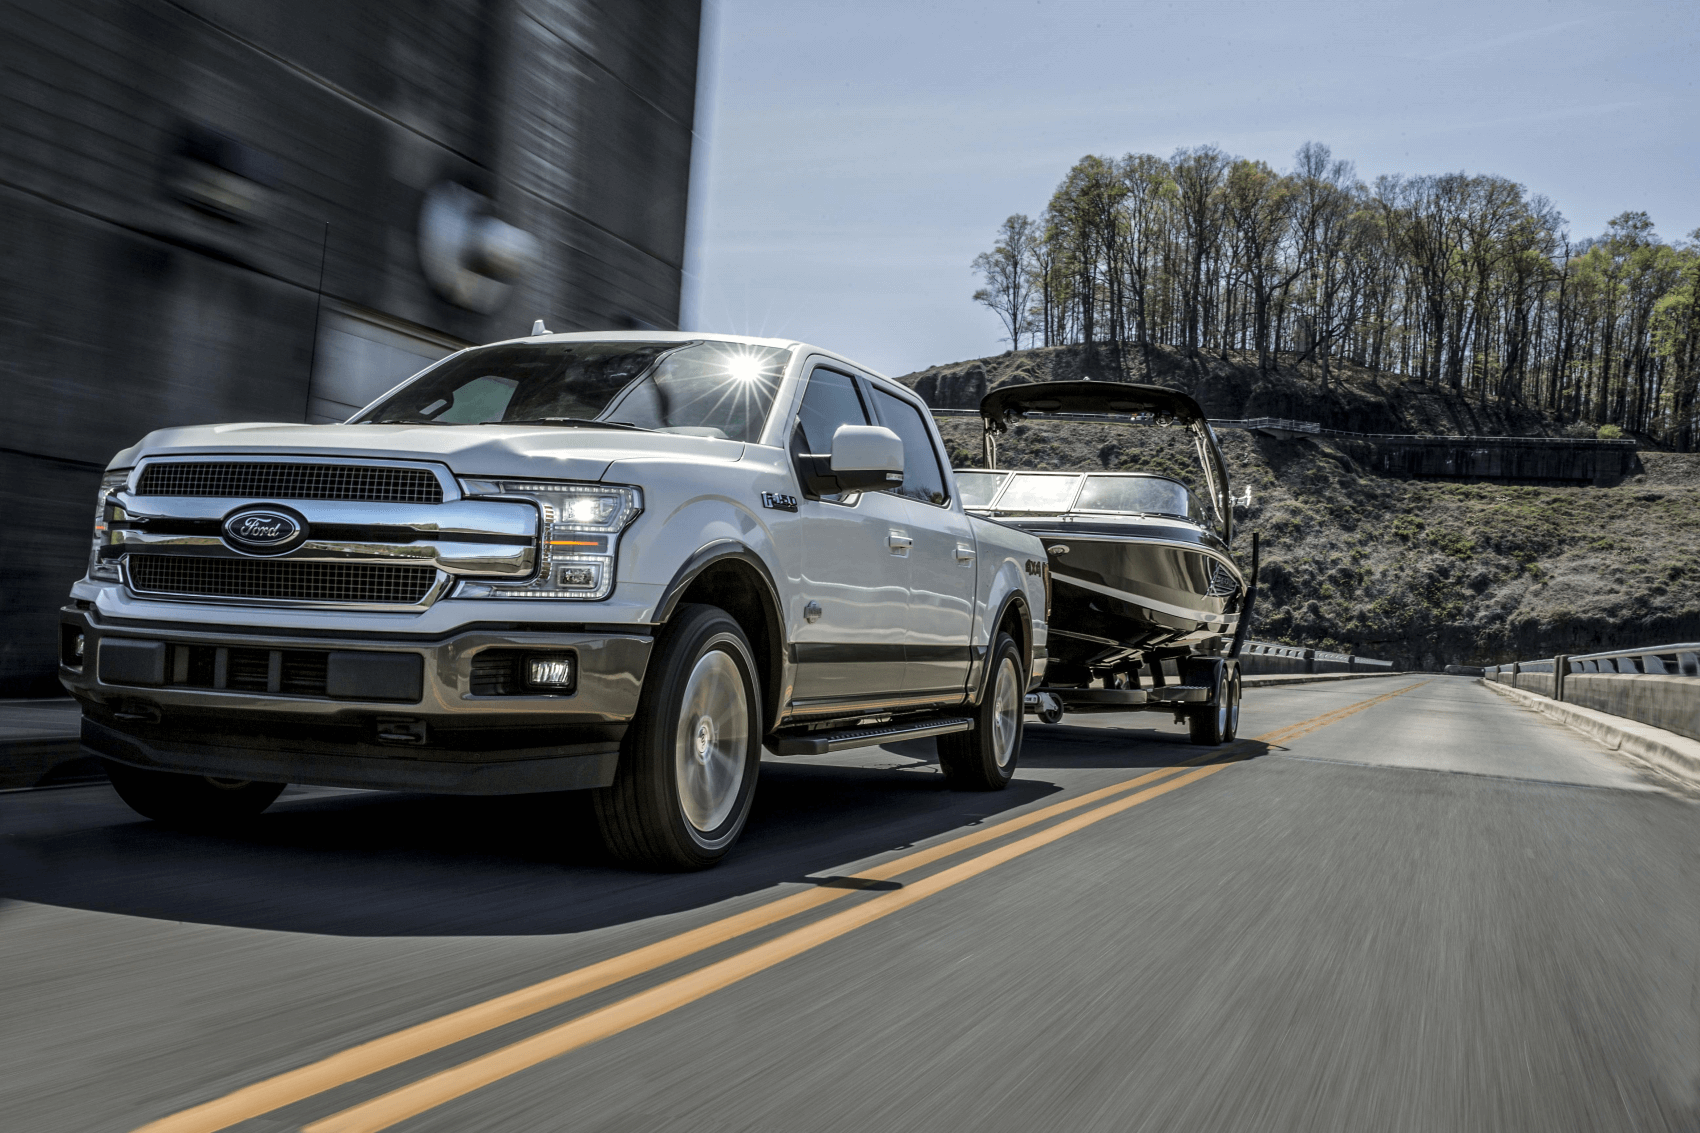 Used Ford F-150 Silver Towing Boat